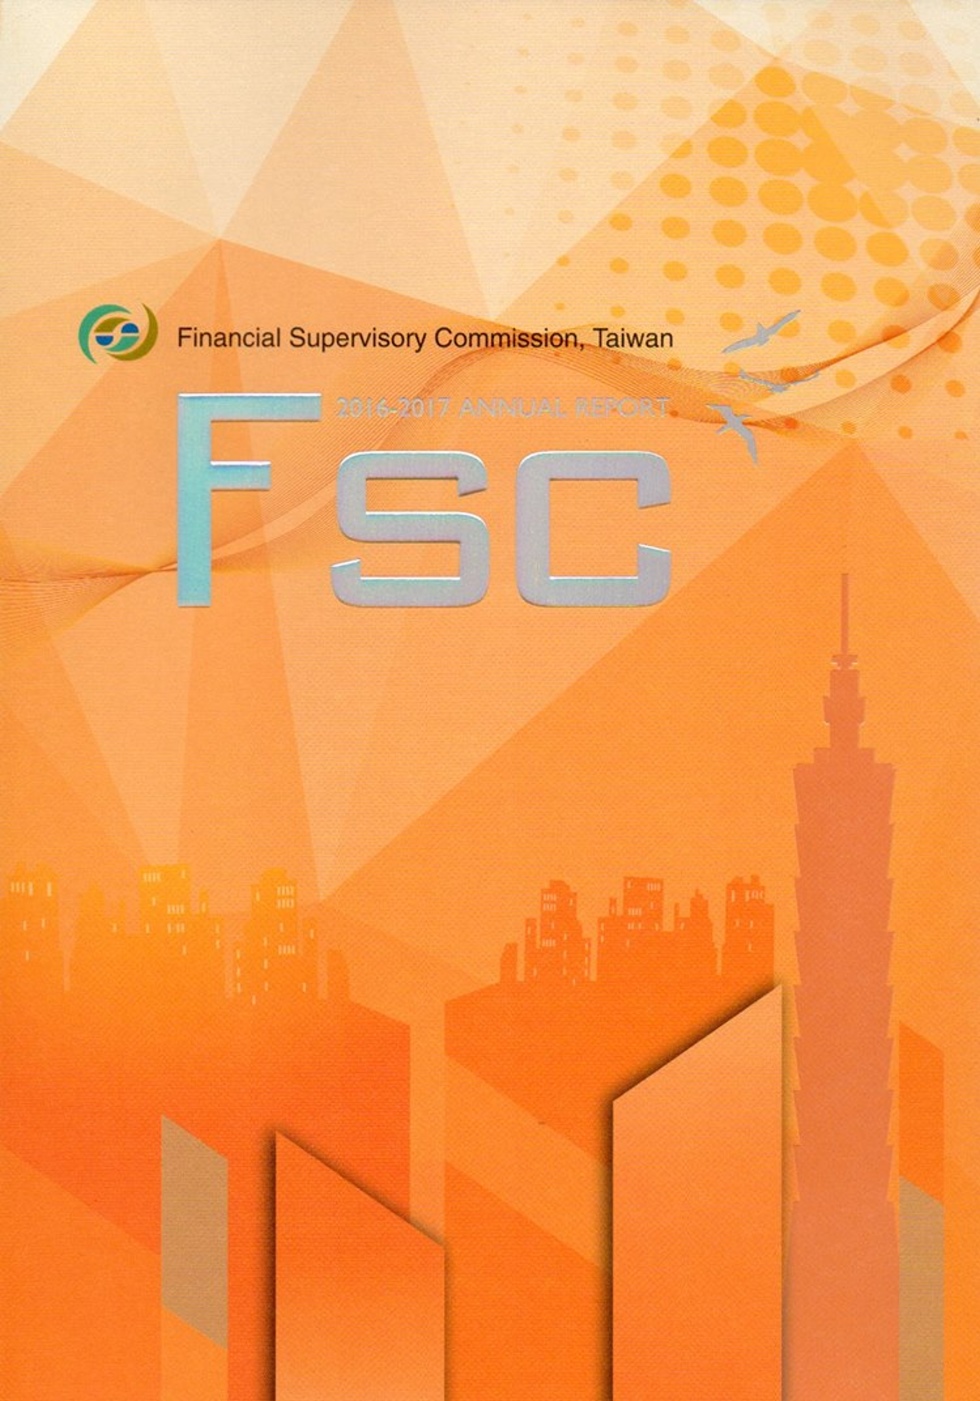 Financial Supervisory Commission,Taiwan 2016-2017 Annual Report [附光碟]